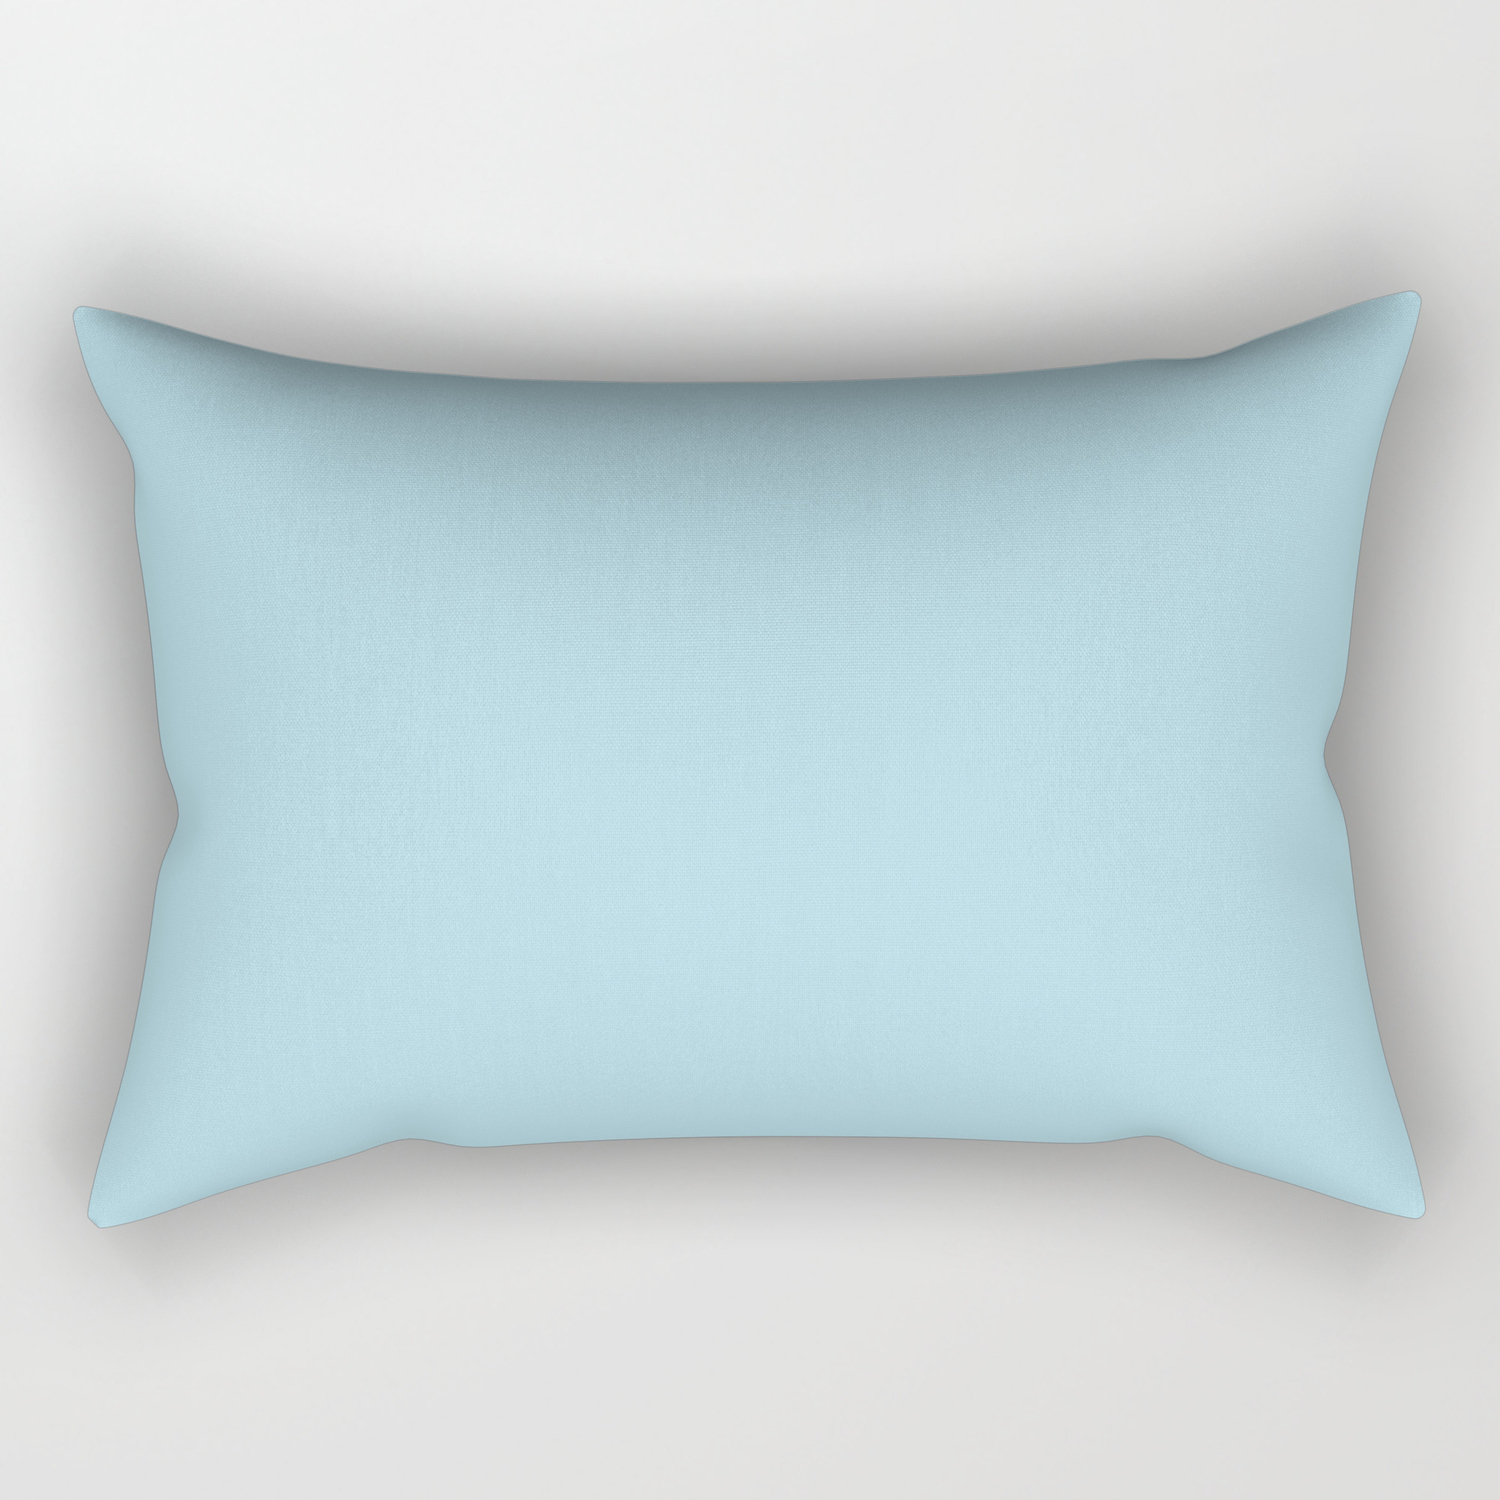 Medium 20 x 14 Pearl & Pink Floral Pattern by Micklyn on Rectangular Pillow Society6 Teal Blue